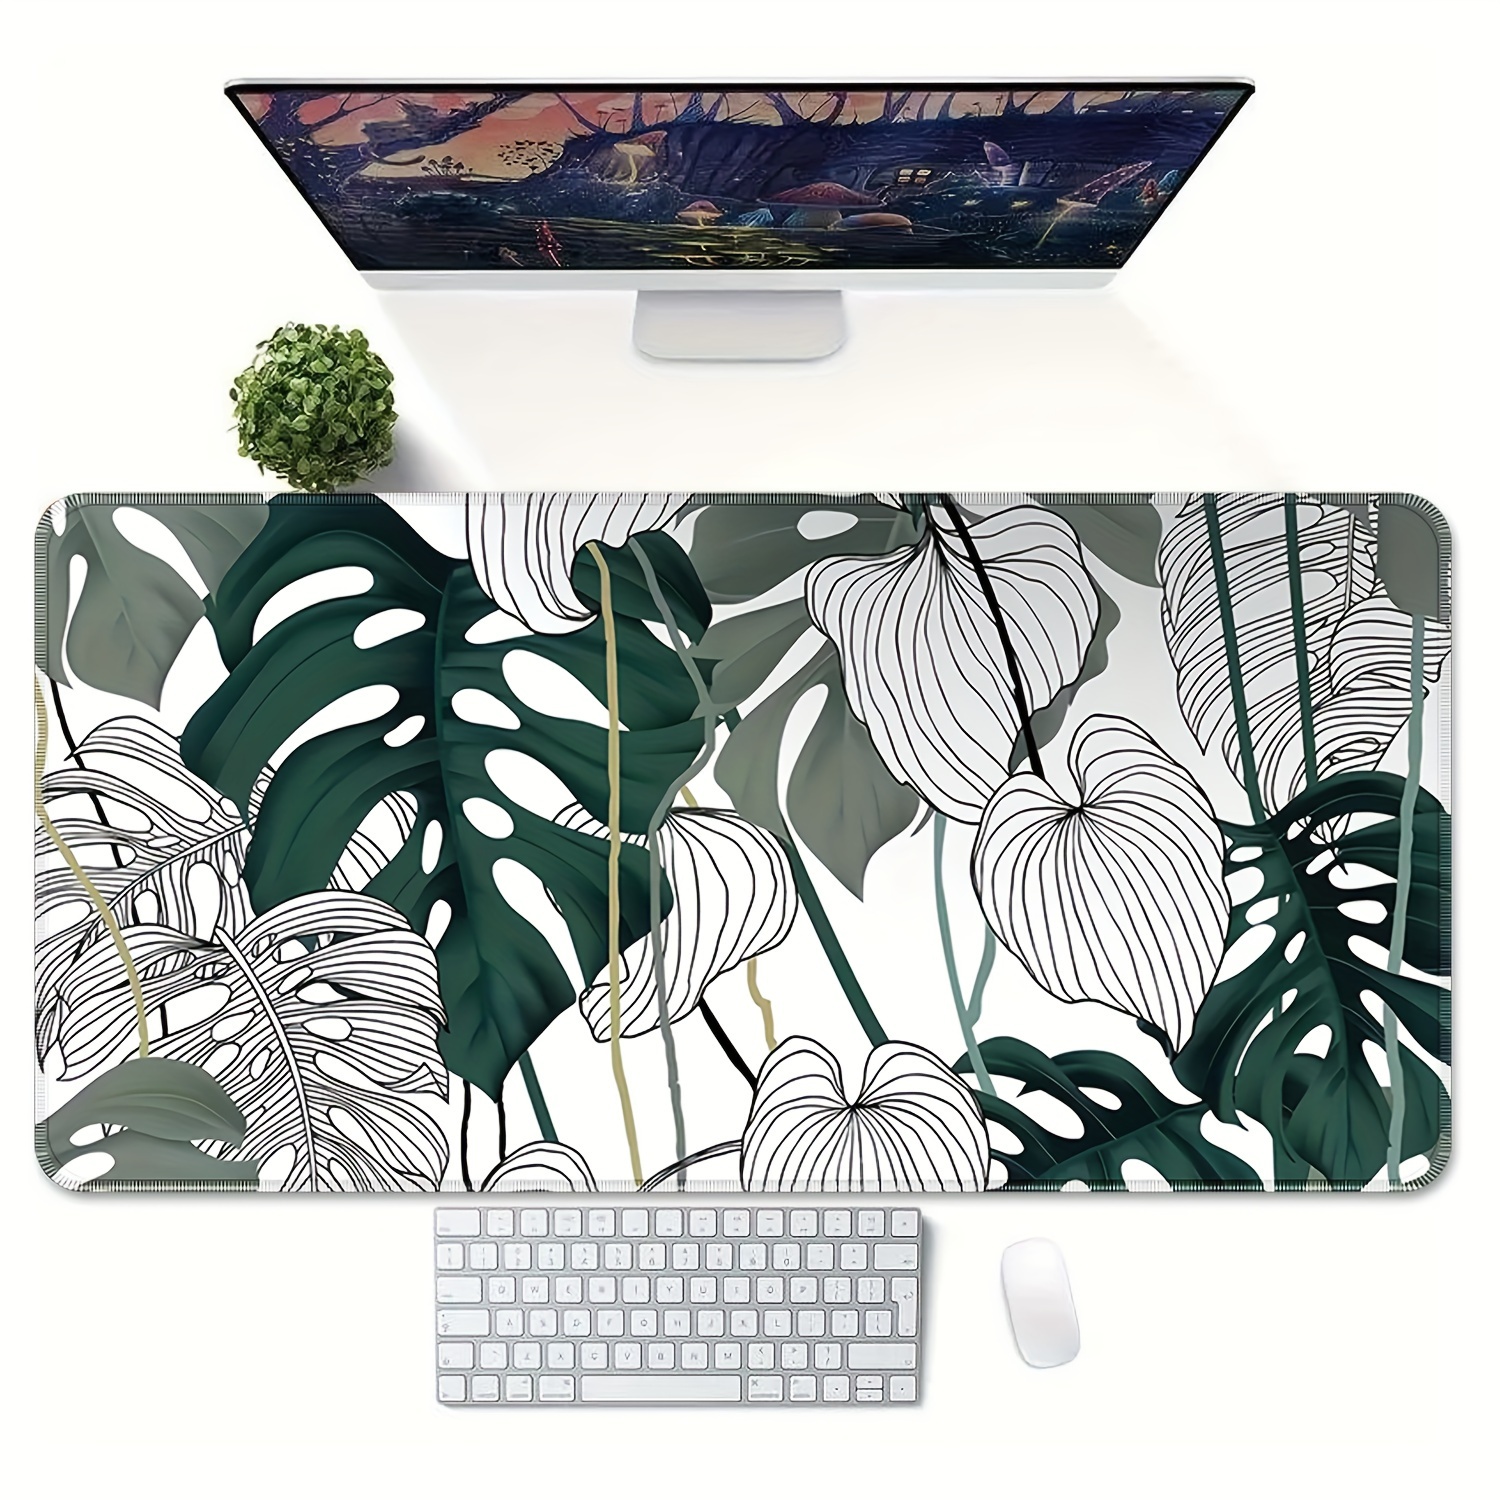 

1pc Green Leaves Large Mouse Pad Extended Desk Pad Xl Keyboard Mat Long Mousepad For Decor Non Slip Rubber Base With Suitable For Gamers, Home Office, Study, And Work